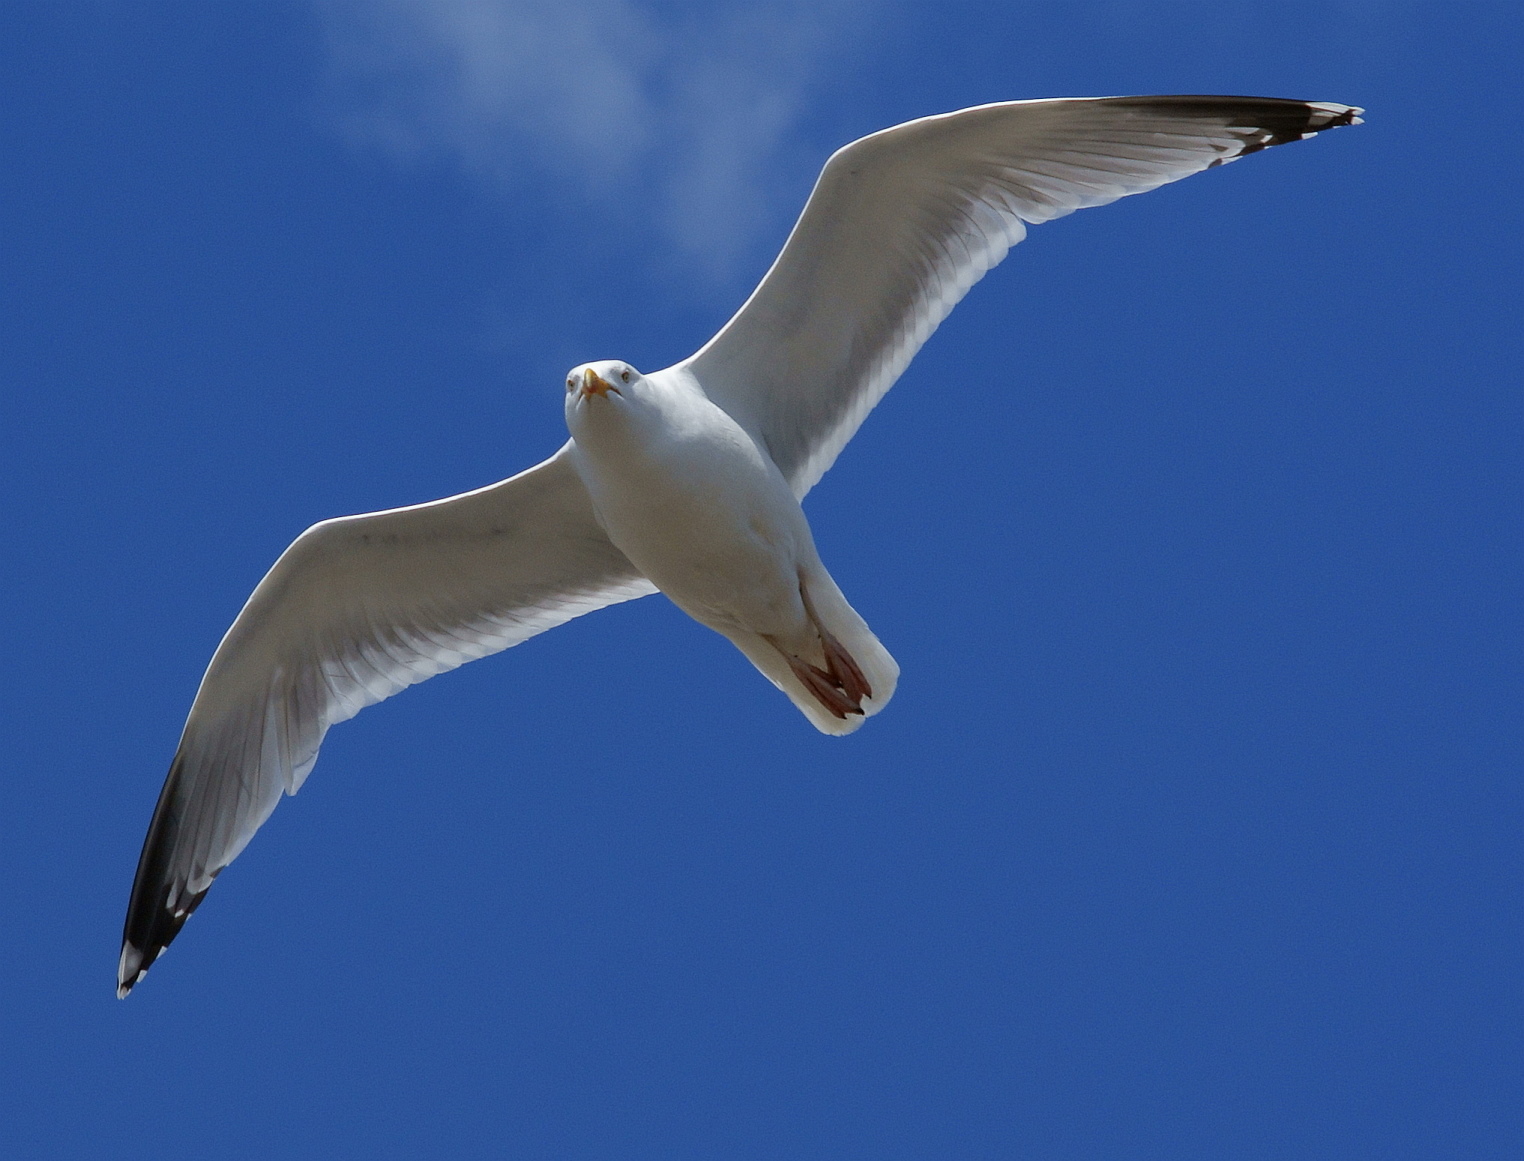 a bird flying through a blue sky with wings outstretched